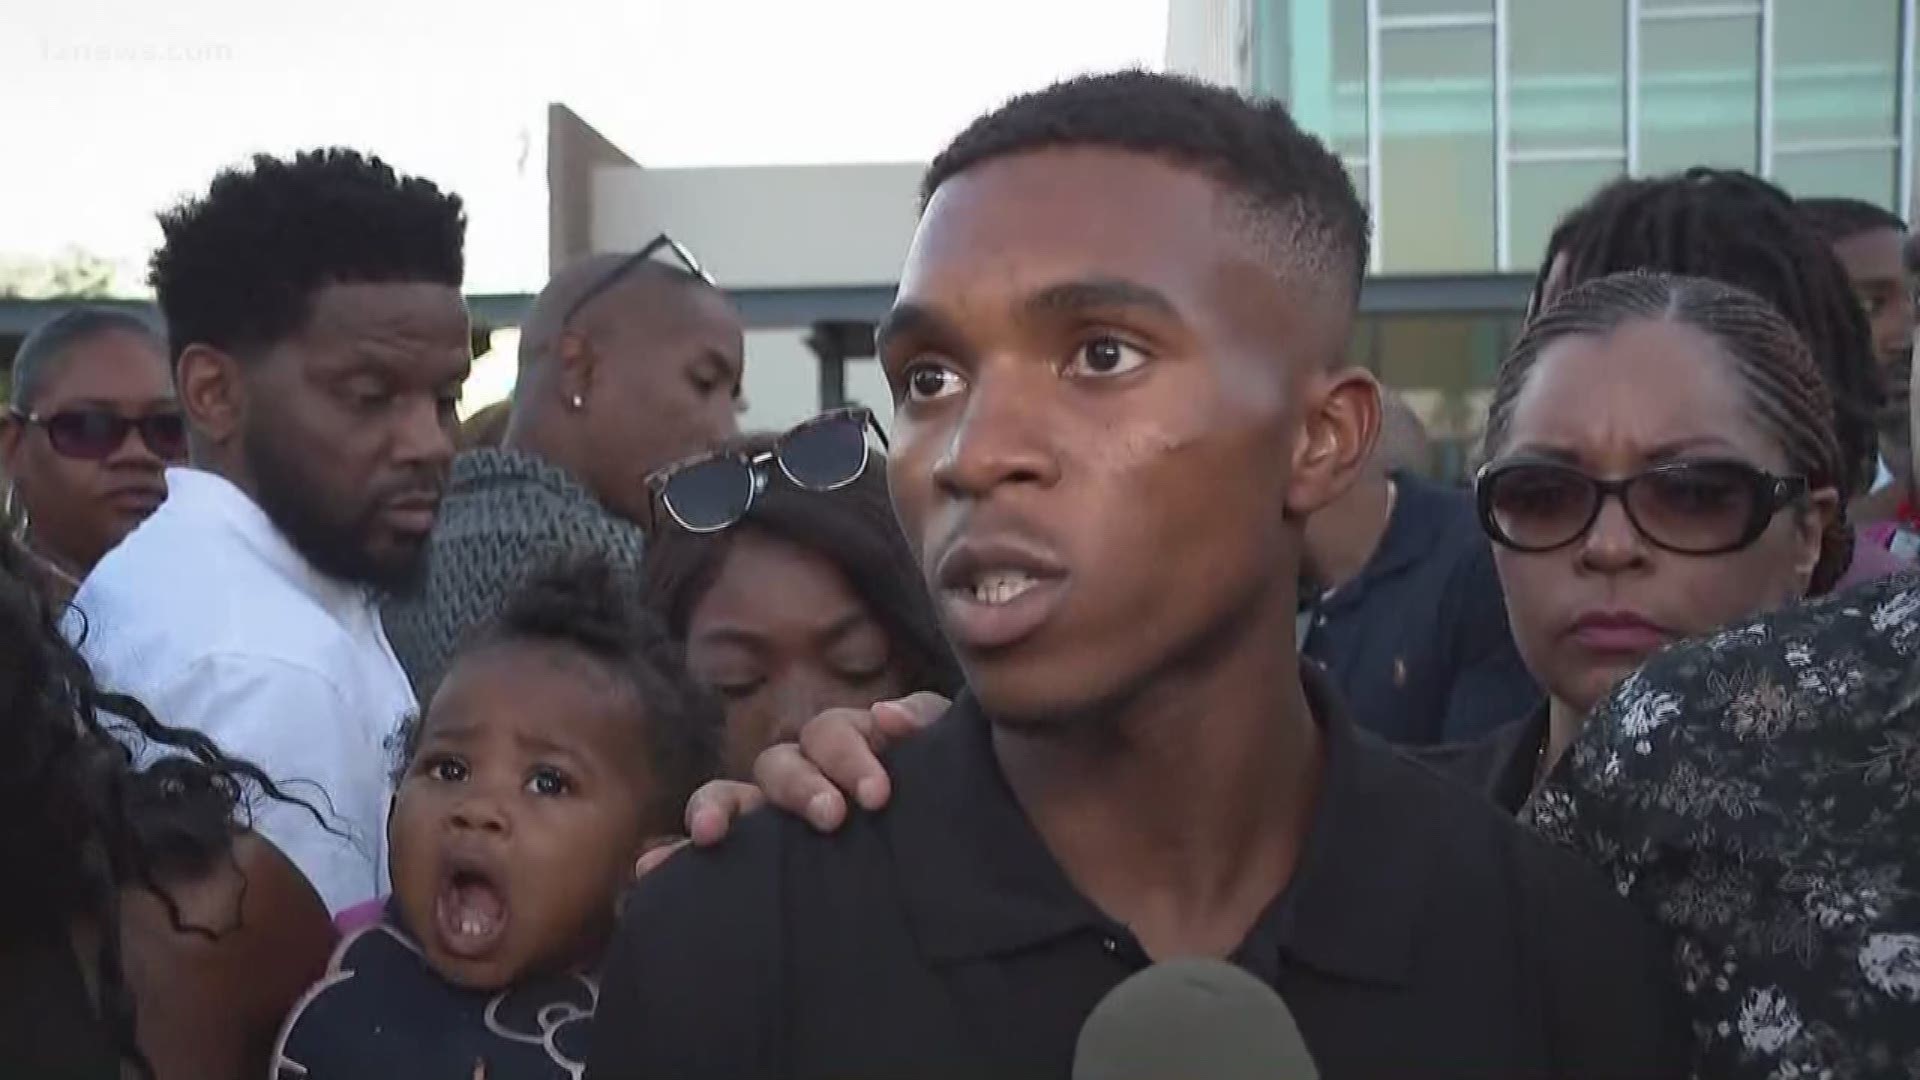 A father says he and his family are lucky to be alive after Phoenix police aimed guns and yelled obscenities at them in a videotaped encounter. Dravon Ames refuses to answer questions about the incident.